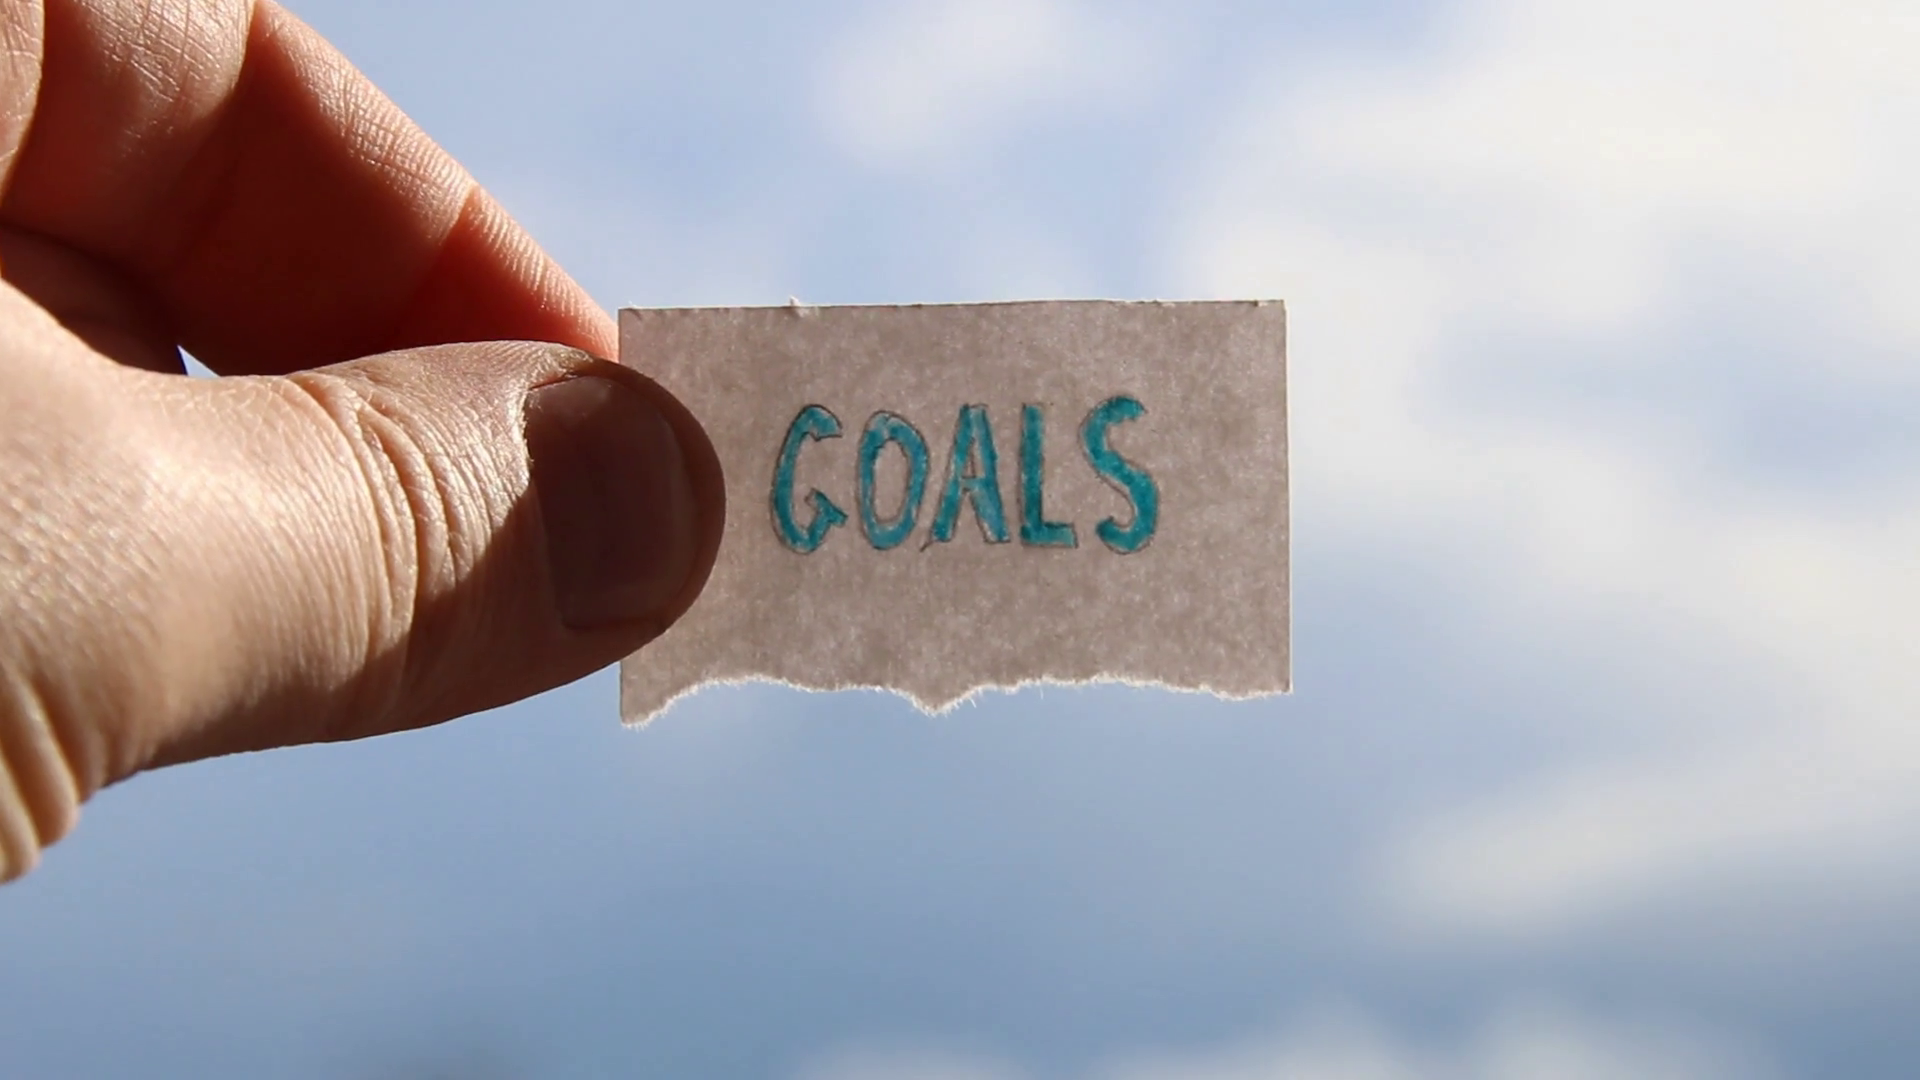 Free Download Goals Idea With Inscription Blurred Photo For Background 19x1080 For Your Desktop Mobile Tablet Explore 33 Goals Background Goals Background Iphone Wallpaper Supreme Goals